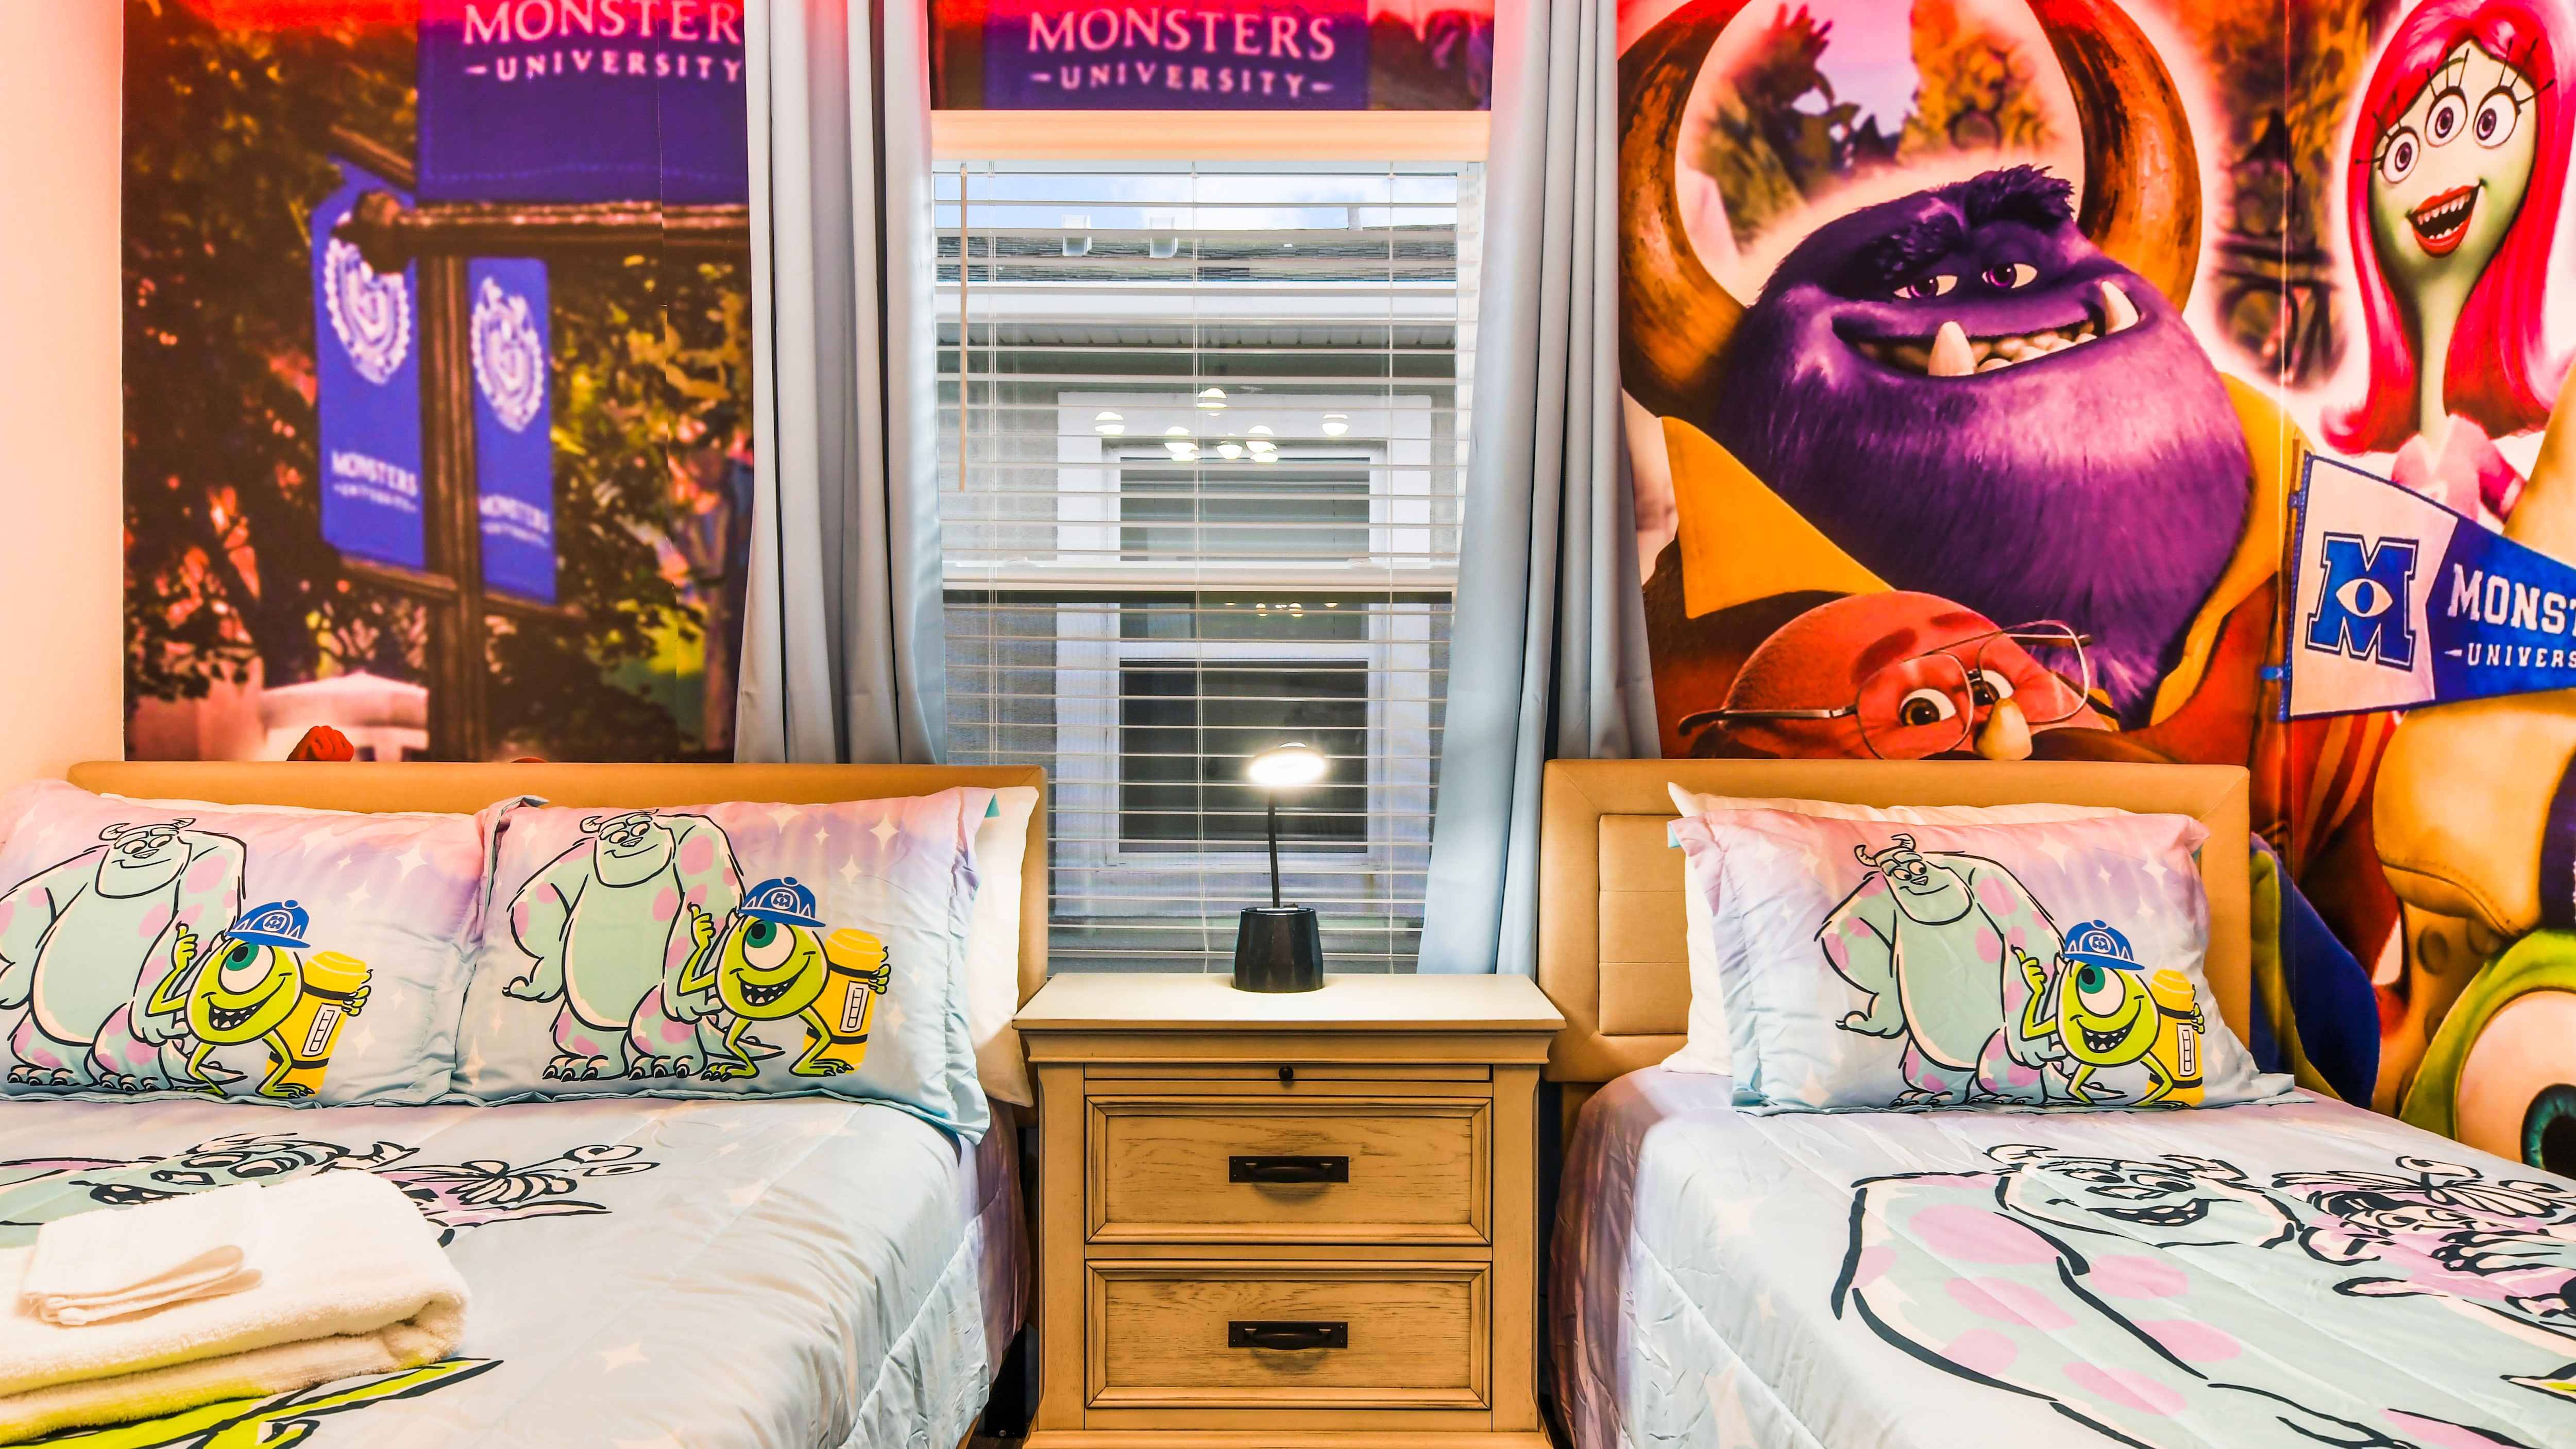 Kids will have fun in this Monster Inc. bedroom with beautiful lights